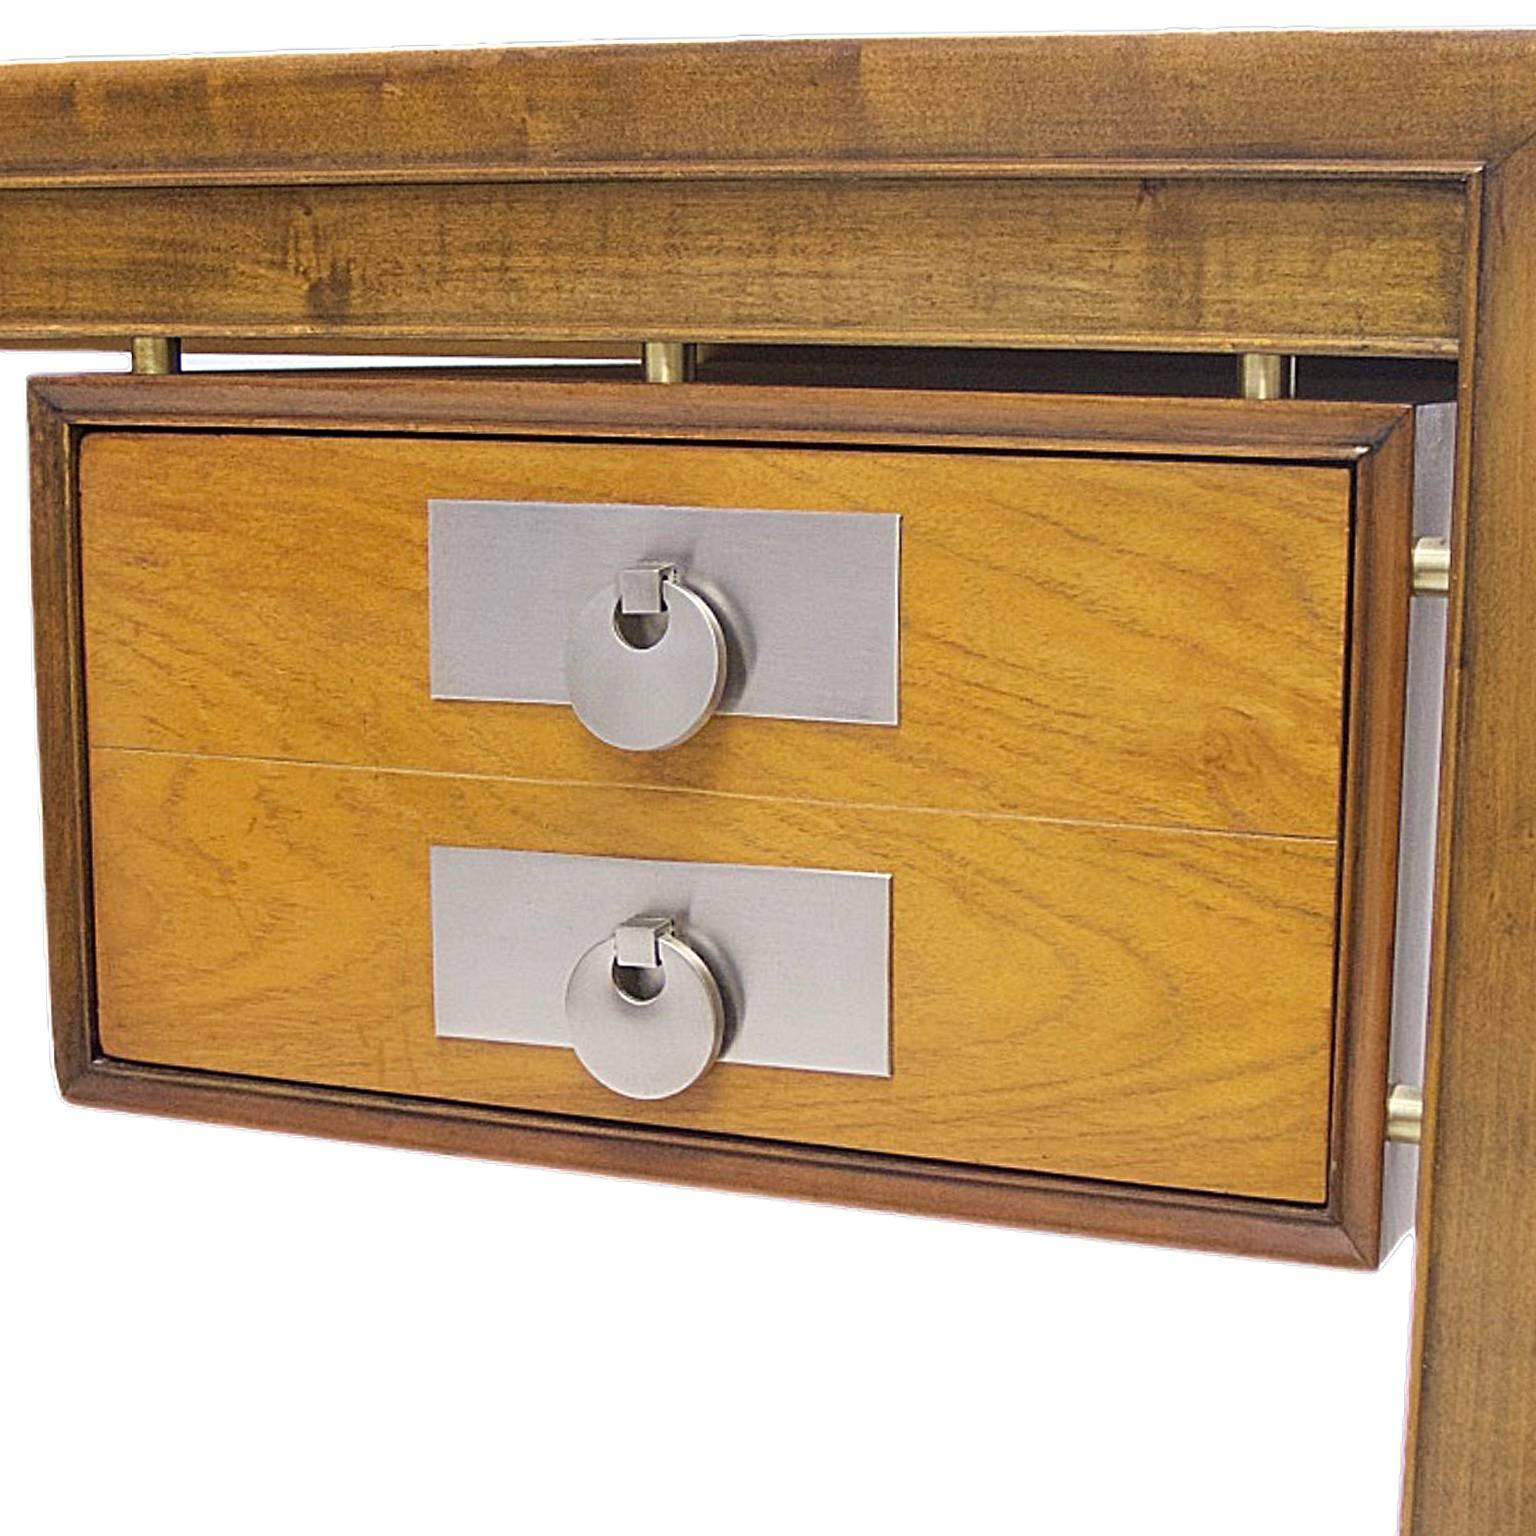 Brass Michael Taylor for Baker Mid-Century Modern Desk in Walnut with Disc Pulls